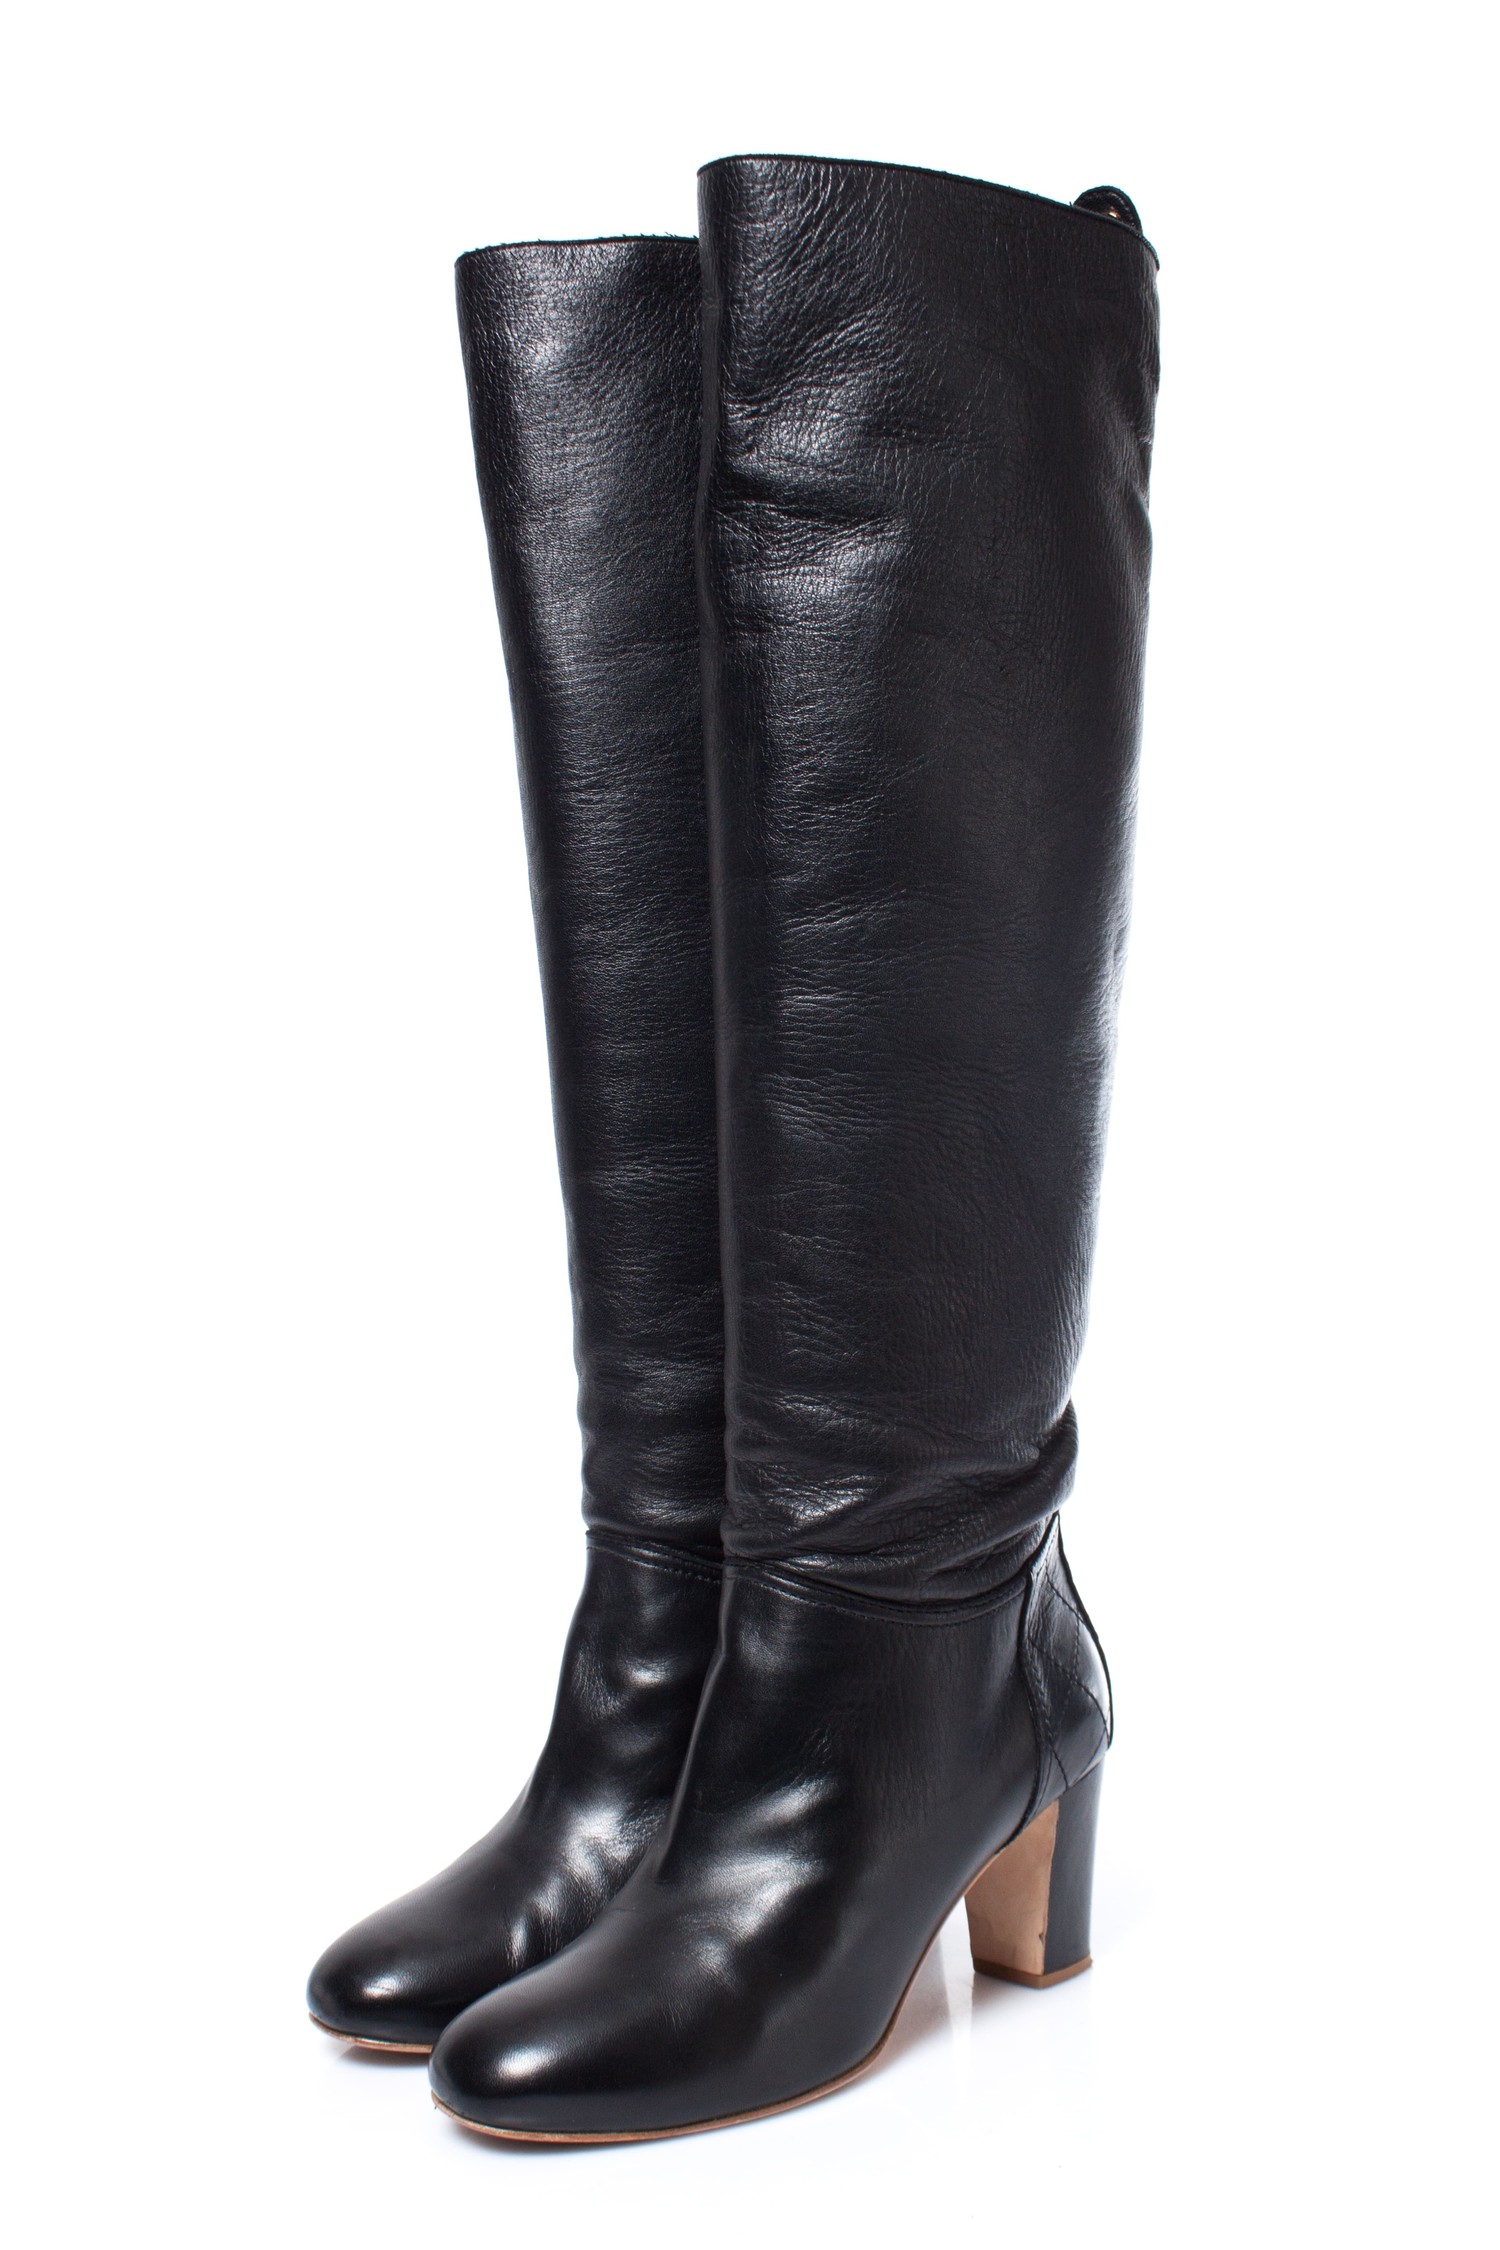 chanel black leather boots